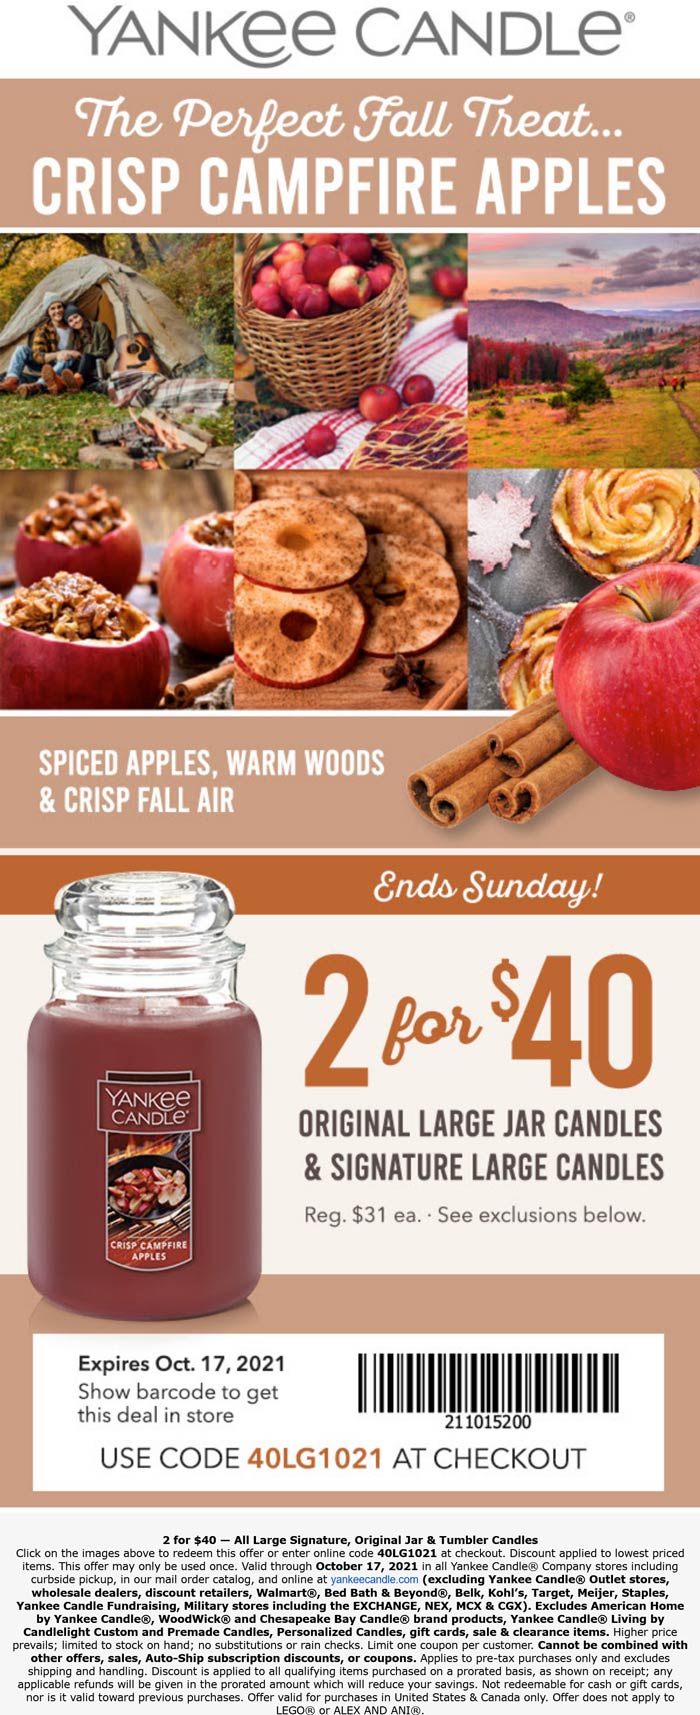 Yankee Candle coupons & promo code for [November 2022]